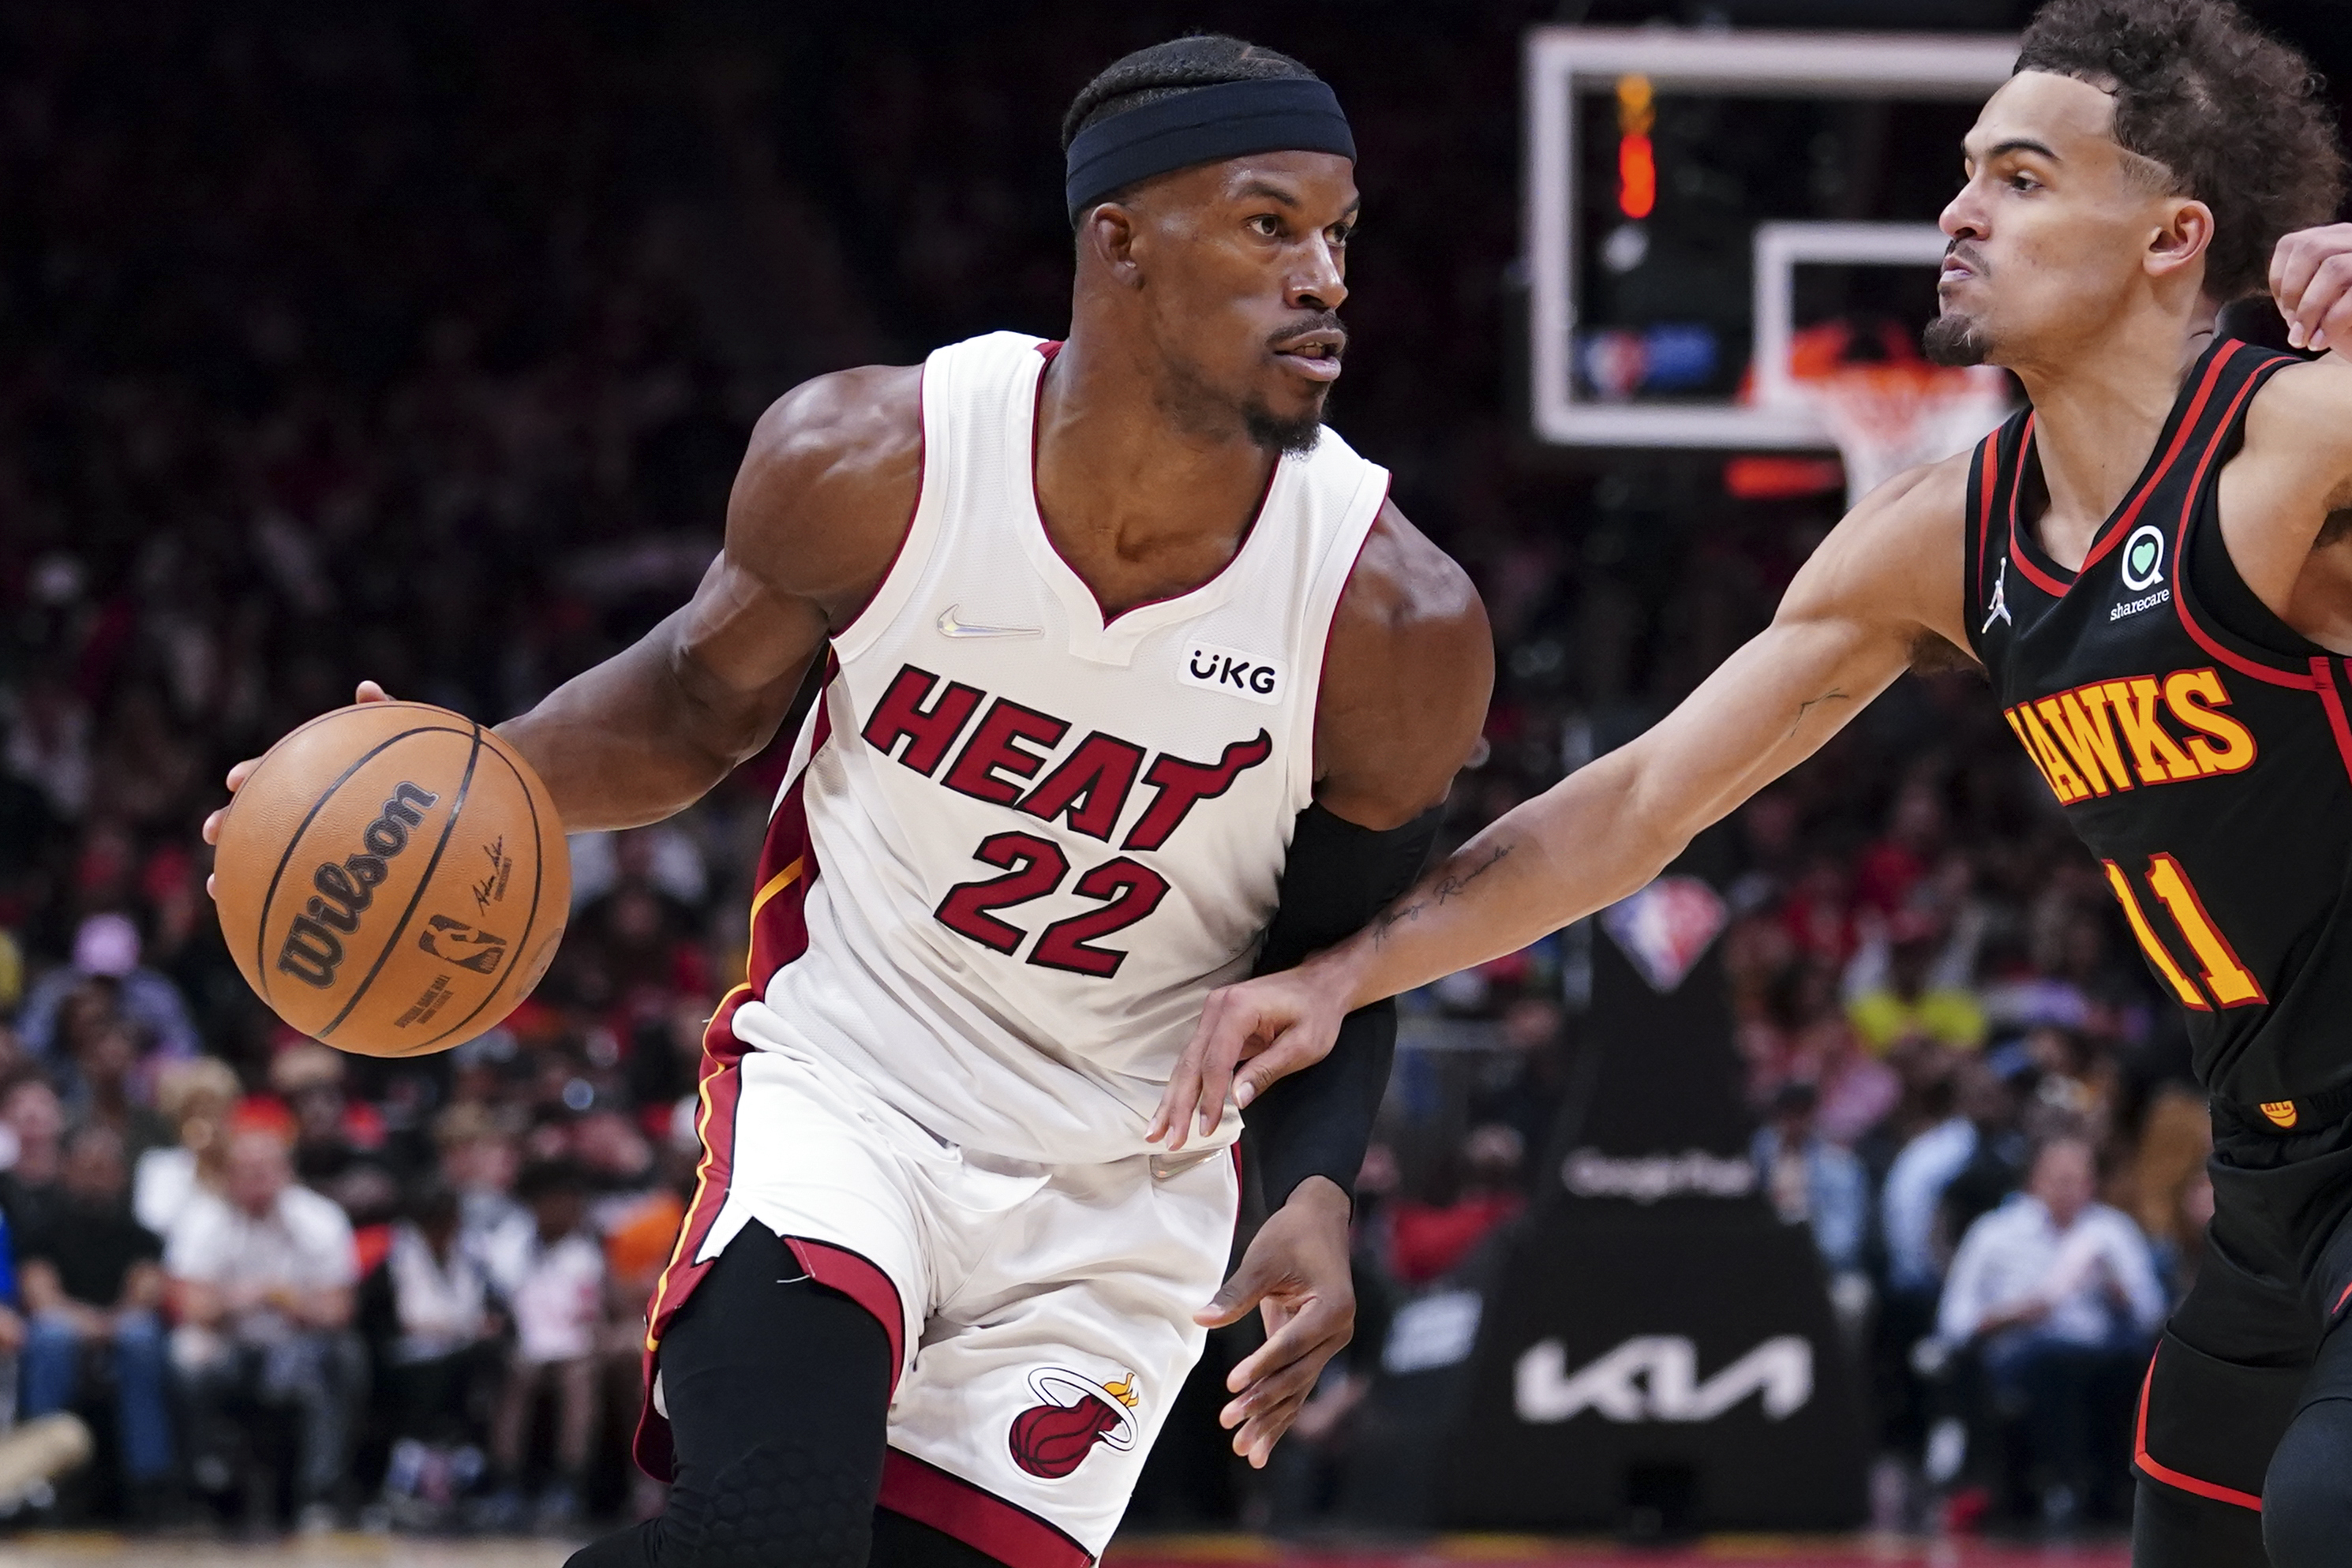 Heat-Hawks Game 5 live stream (4/26) How to watch NBA playoffs online, TV, time